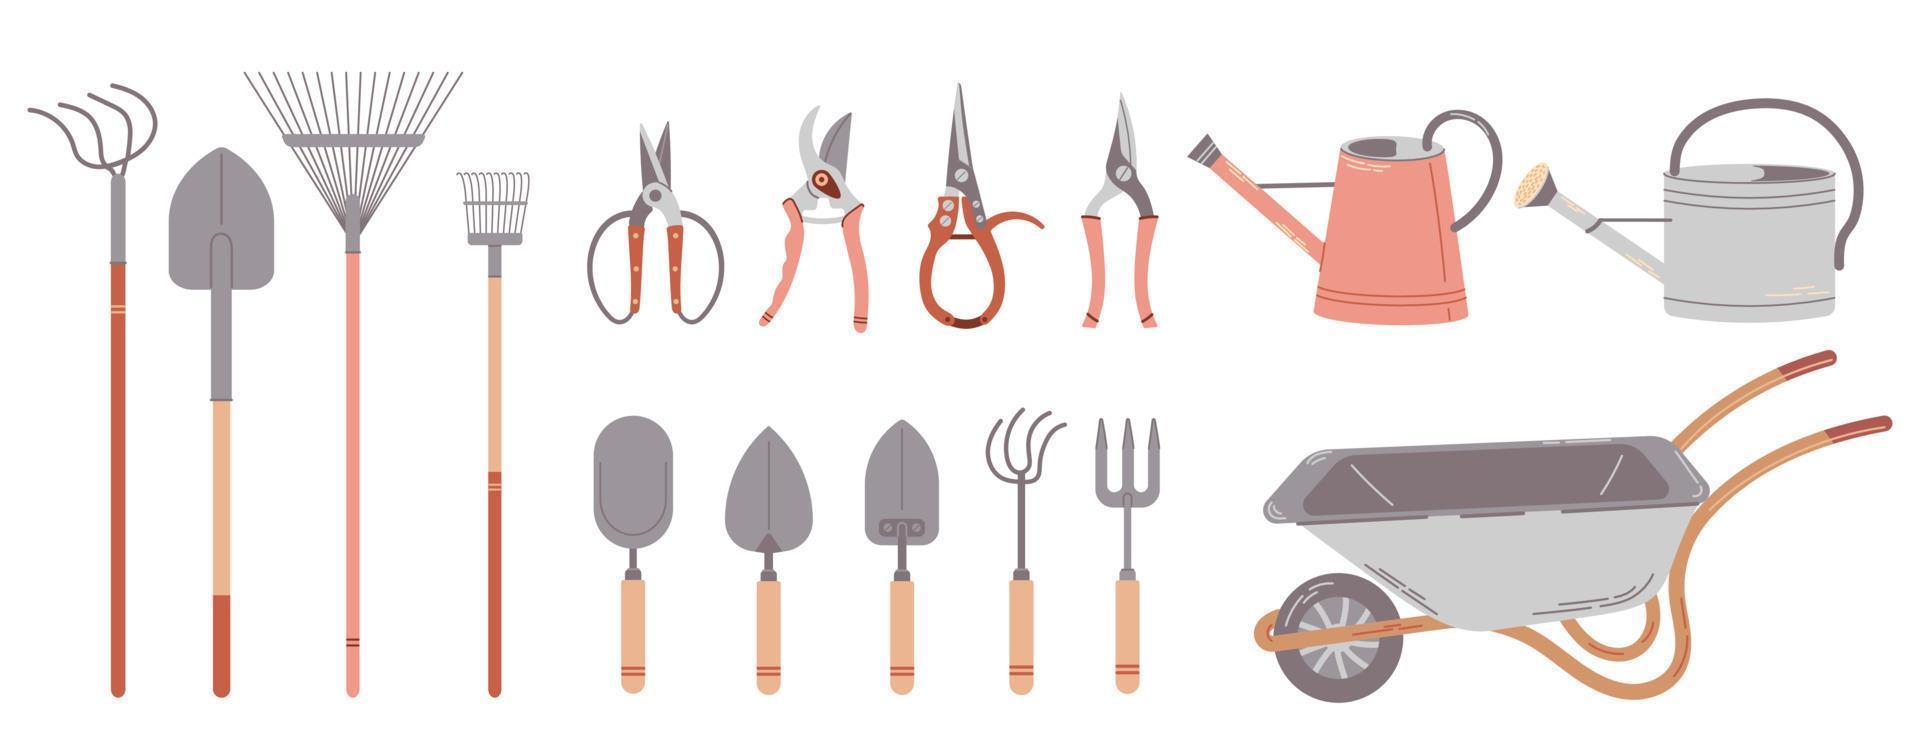 Big set of garden tools and items. Hand drawn illustrations isolated on white background. vector